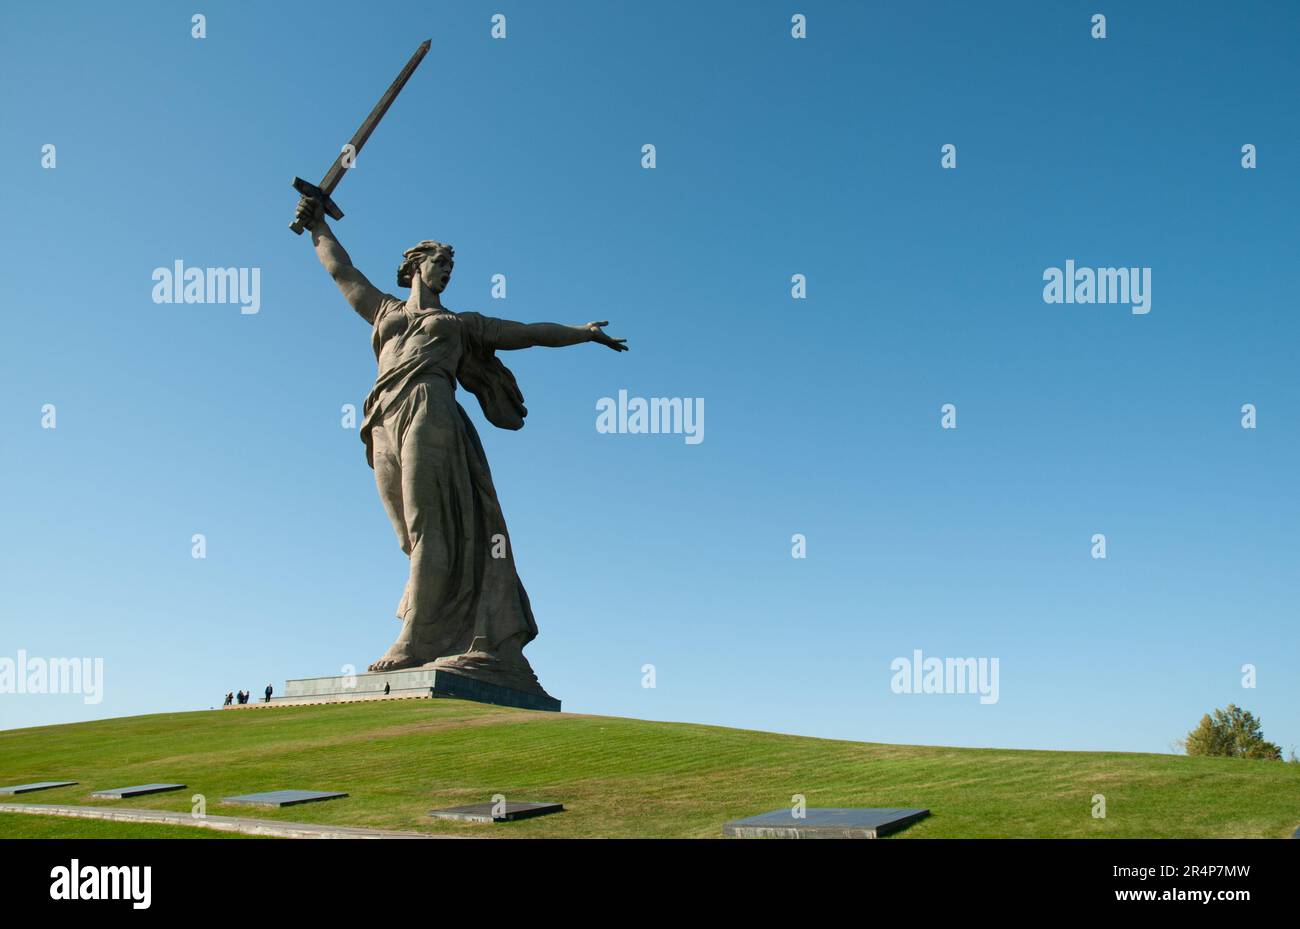 'The Motherland Calls', the tallest state in the world, is situated in Mamayev Kurgan, Volgograd (formerly Stalingrad) in the Russian federation.  It commemorates the Battle of Stalingrad, fought between the Nazis and the Soviet Union in the Great Patriotic War, World War 2 Stock Photo